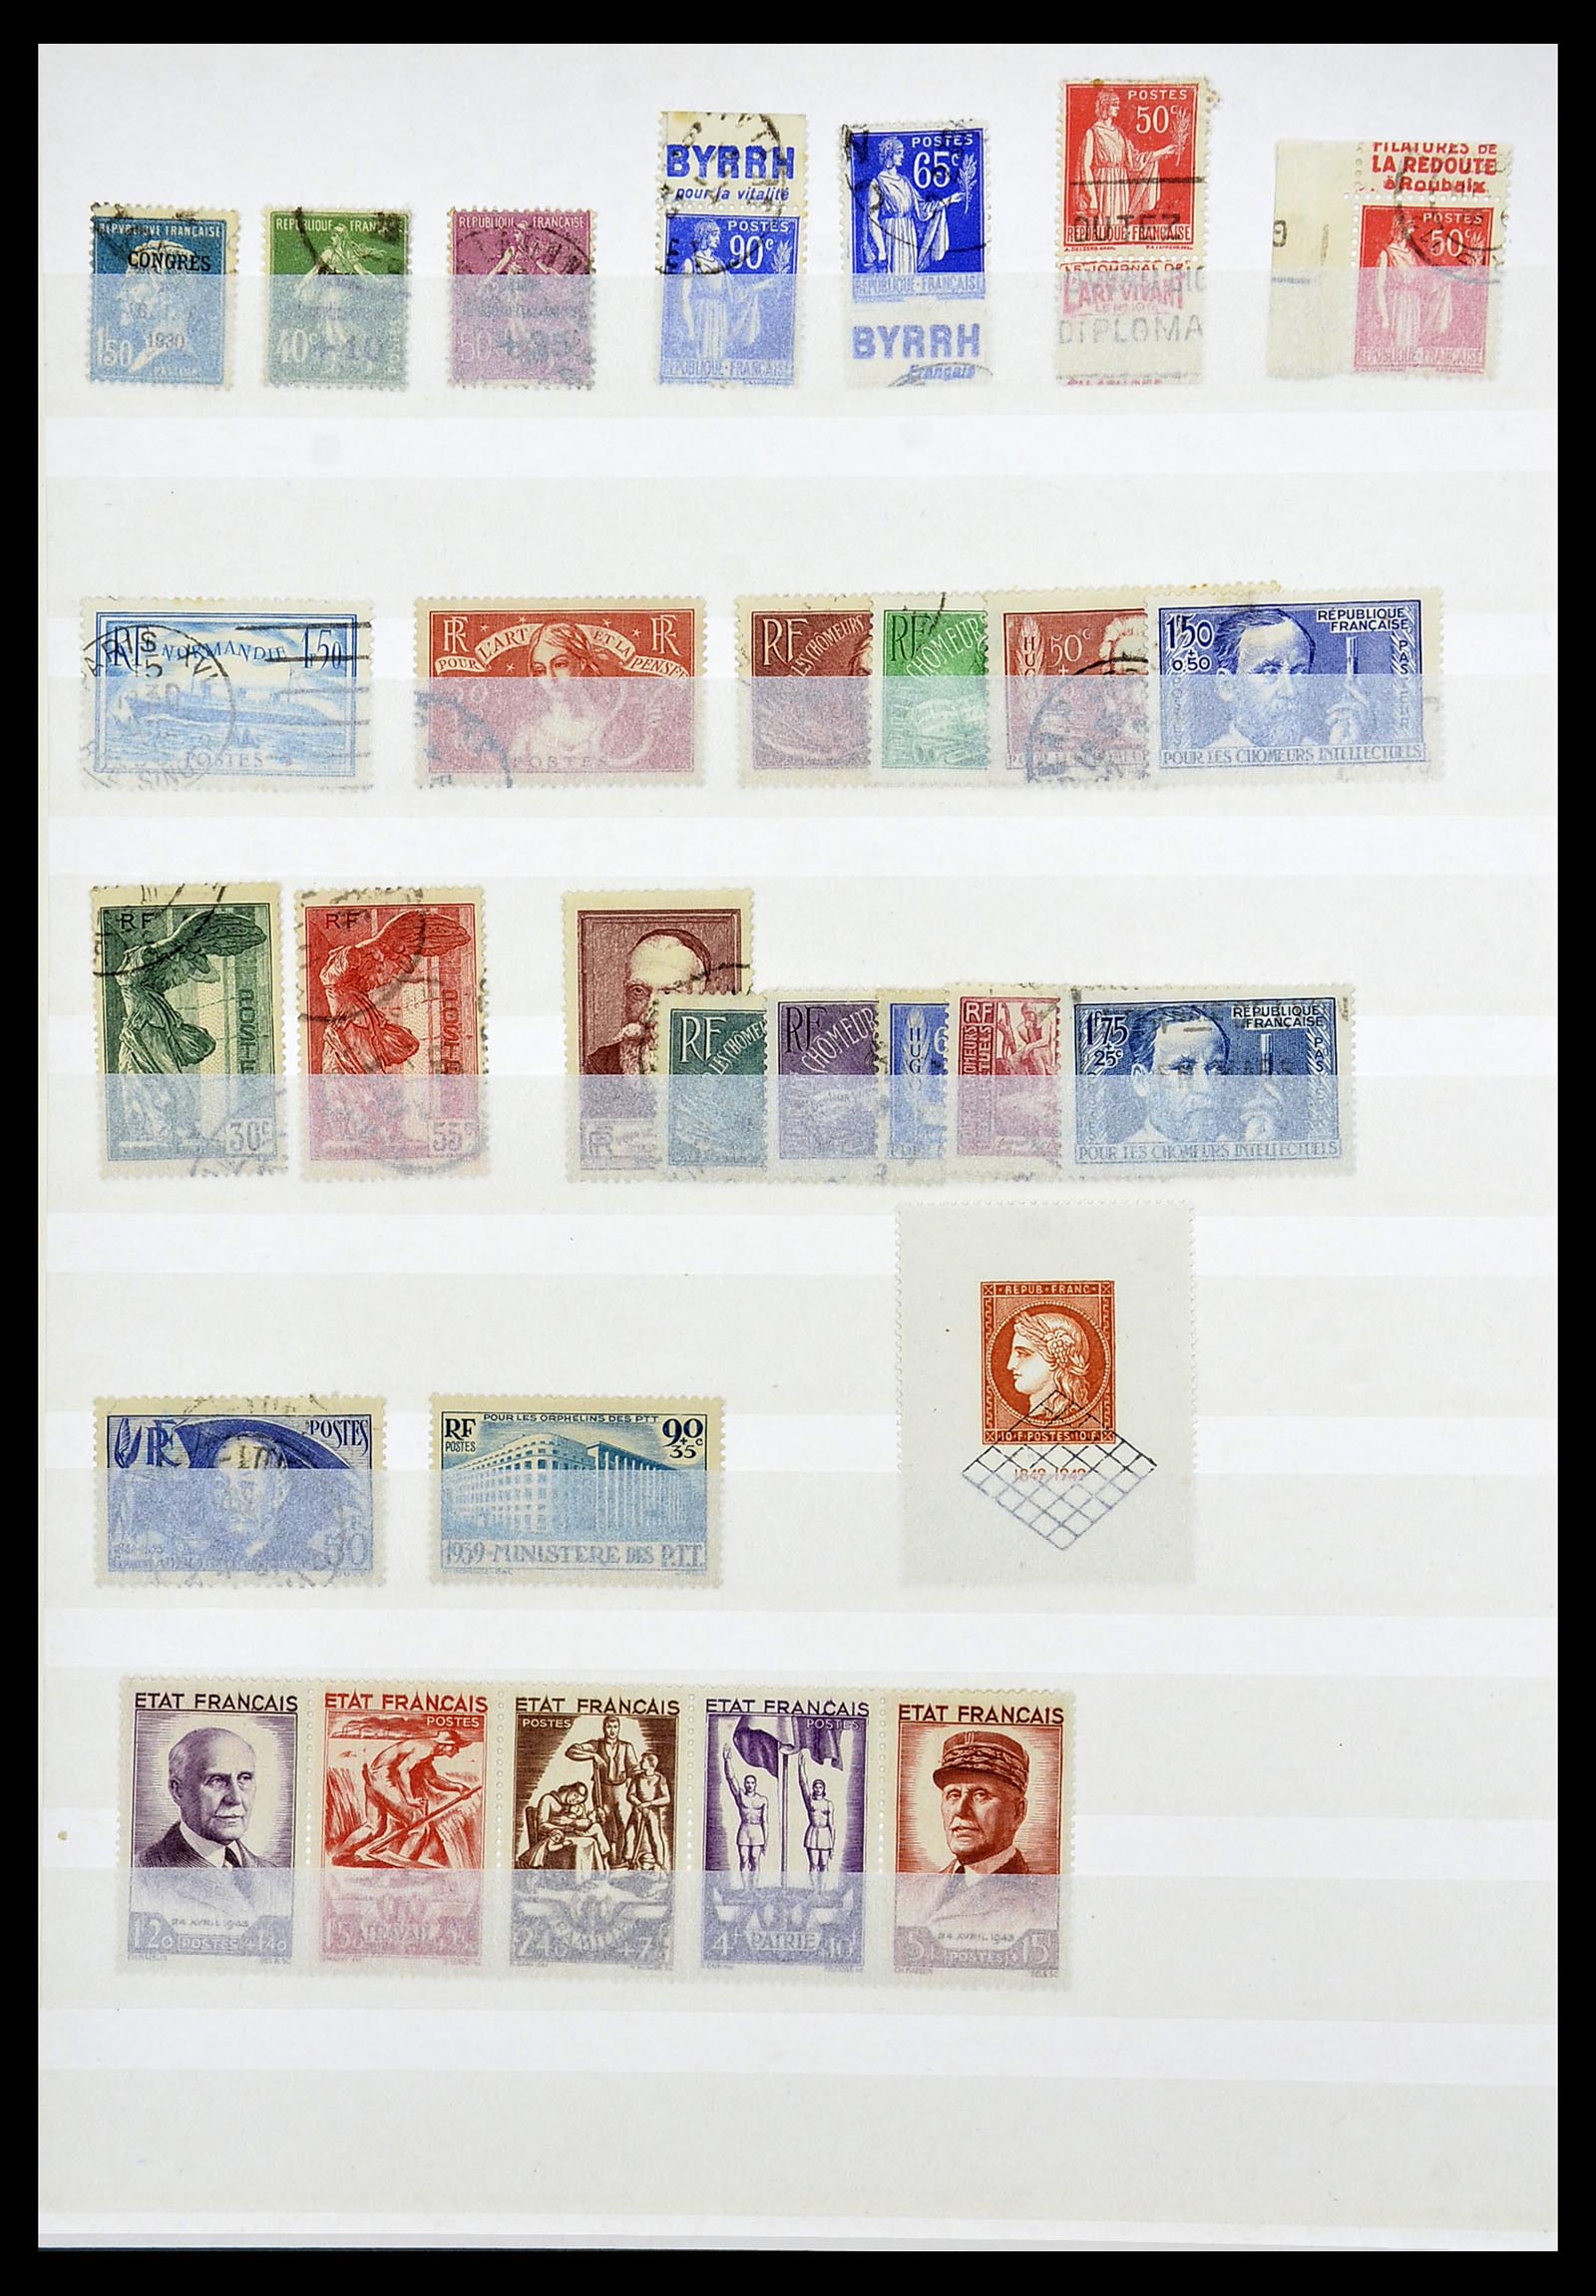 34263 024 - Stamp collection 34263 European countries key stamps 1840-1950.